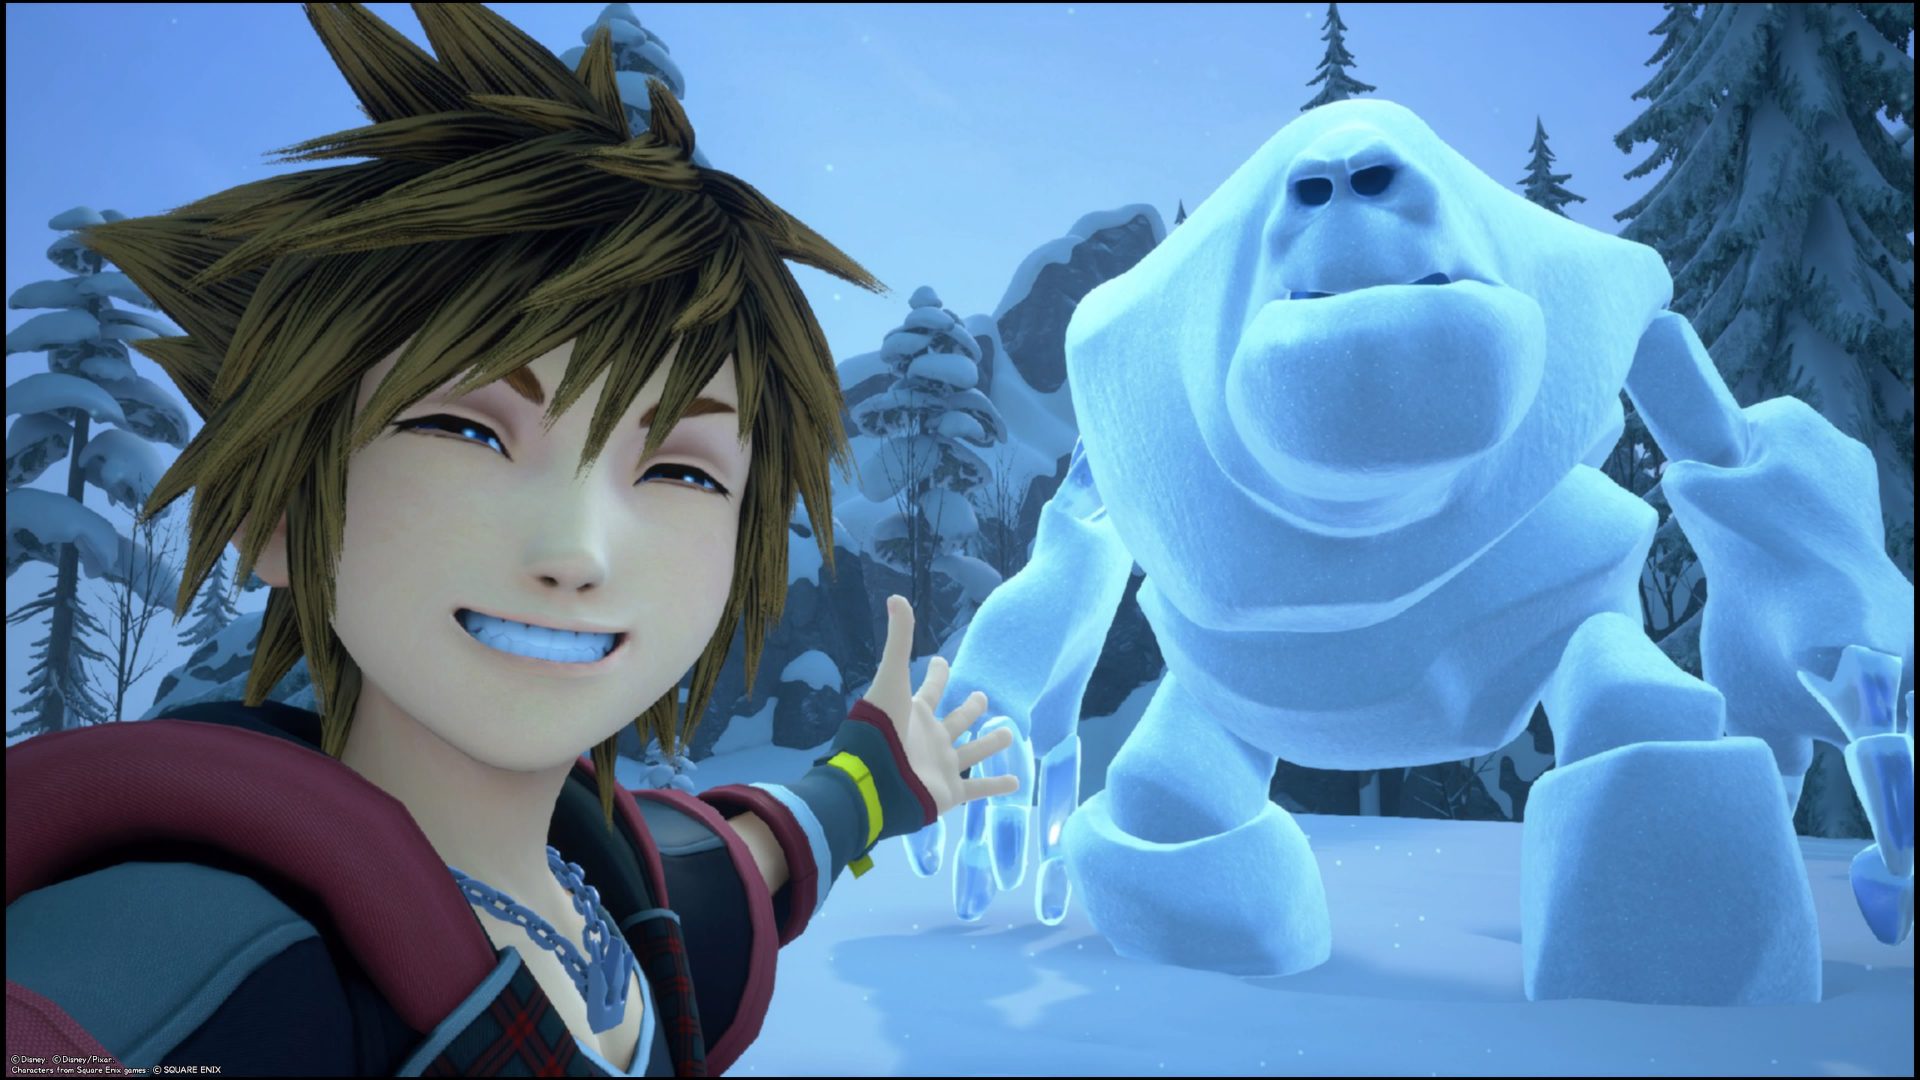 Kingdom Hearts III review: Not a small world after all